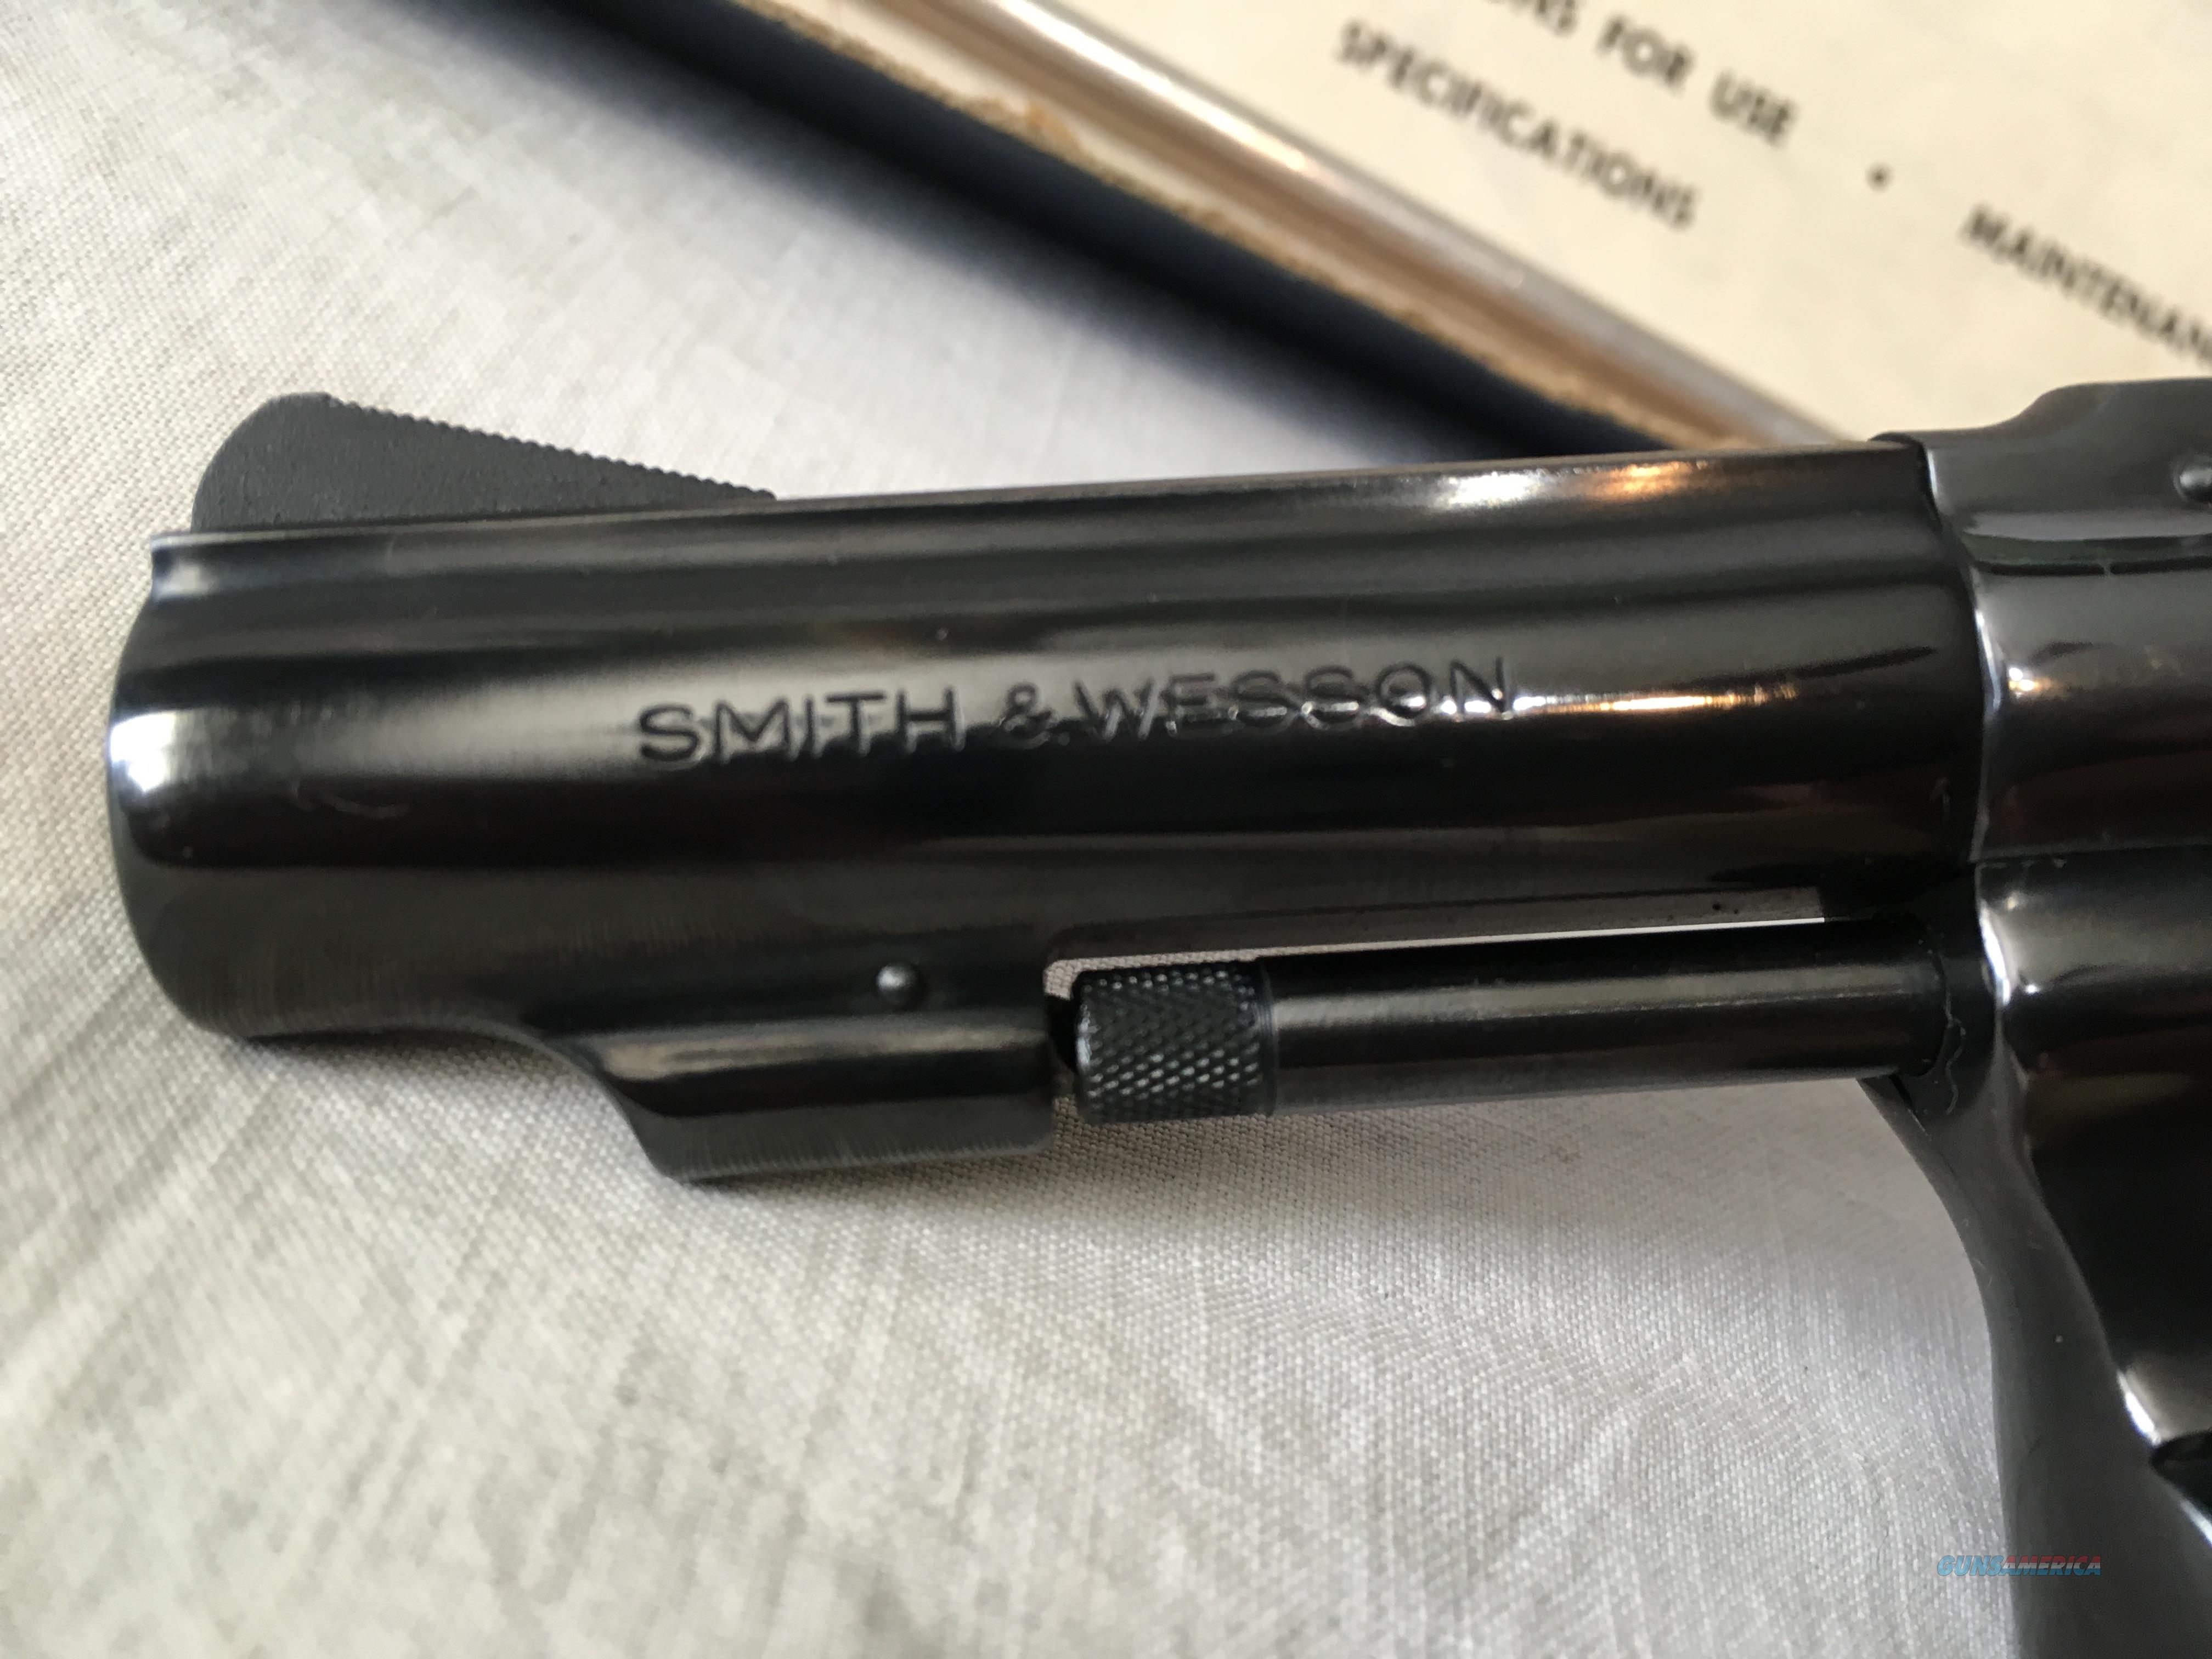 Smith wesson serial numbers manufacture date